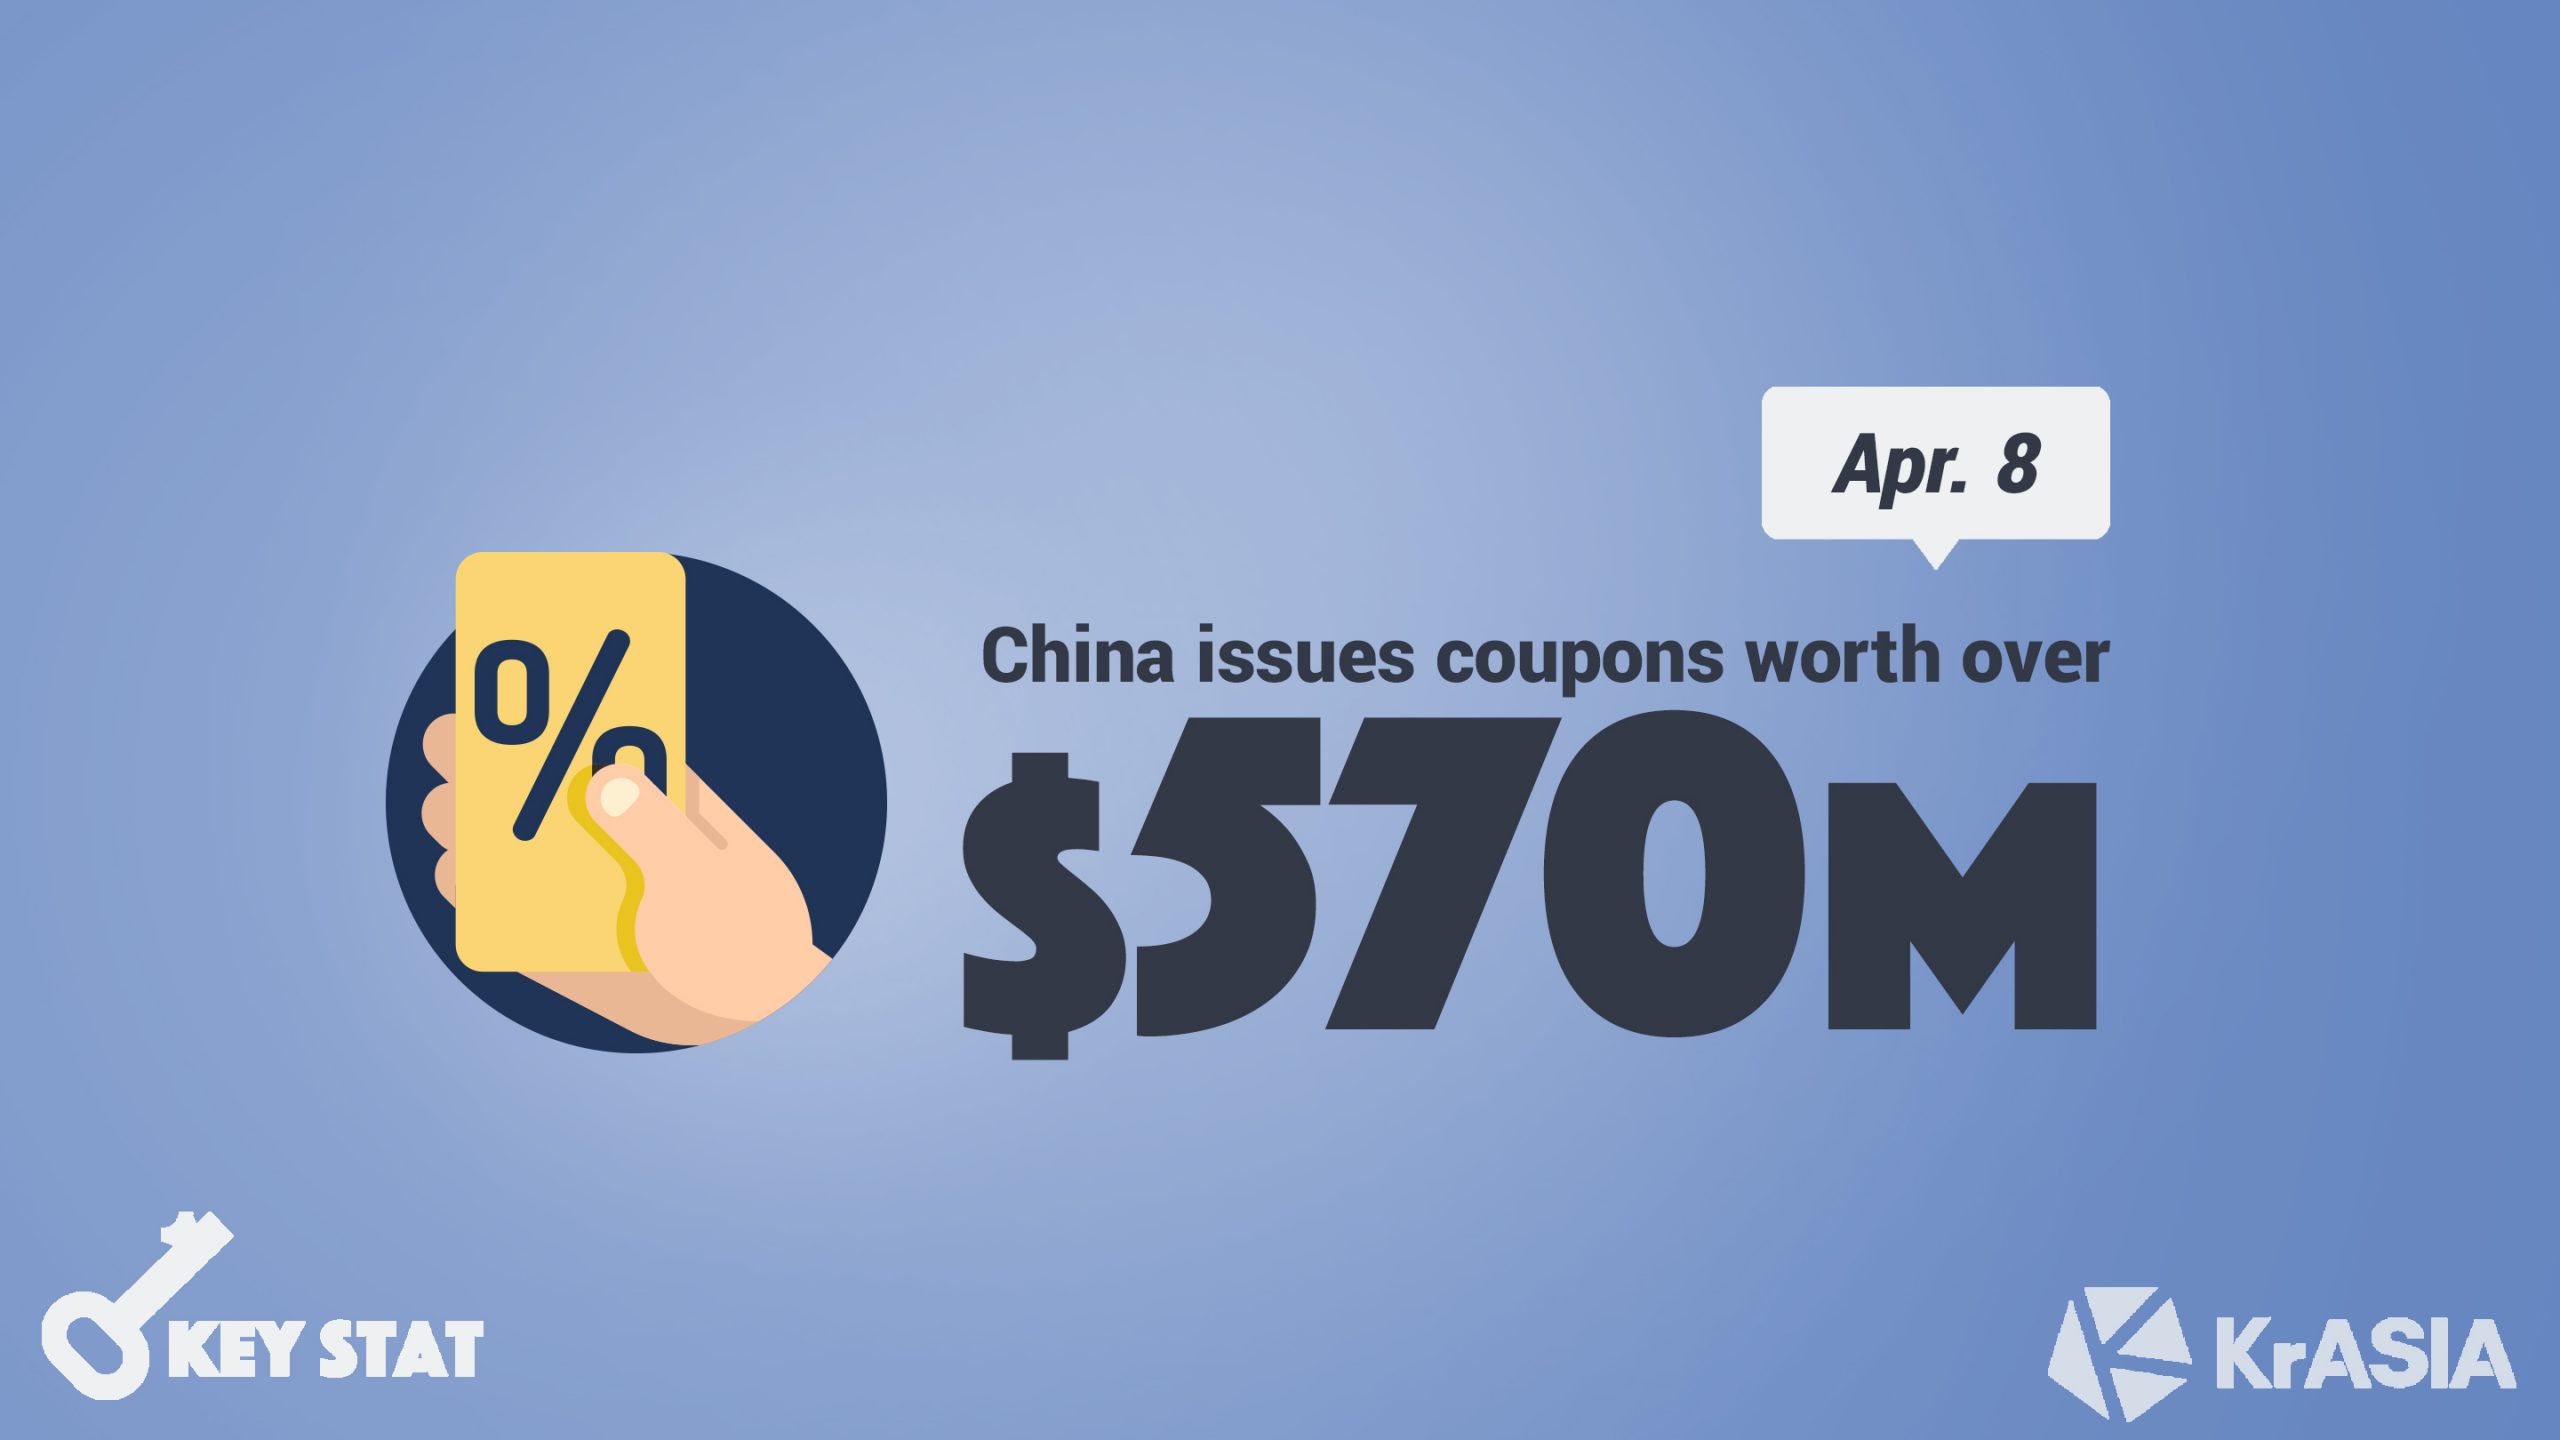 KEY STAT | Local governments to stimulate consumption in China via digital coupons